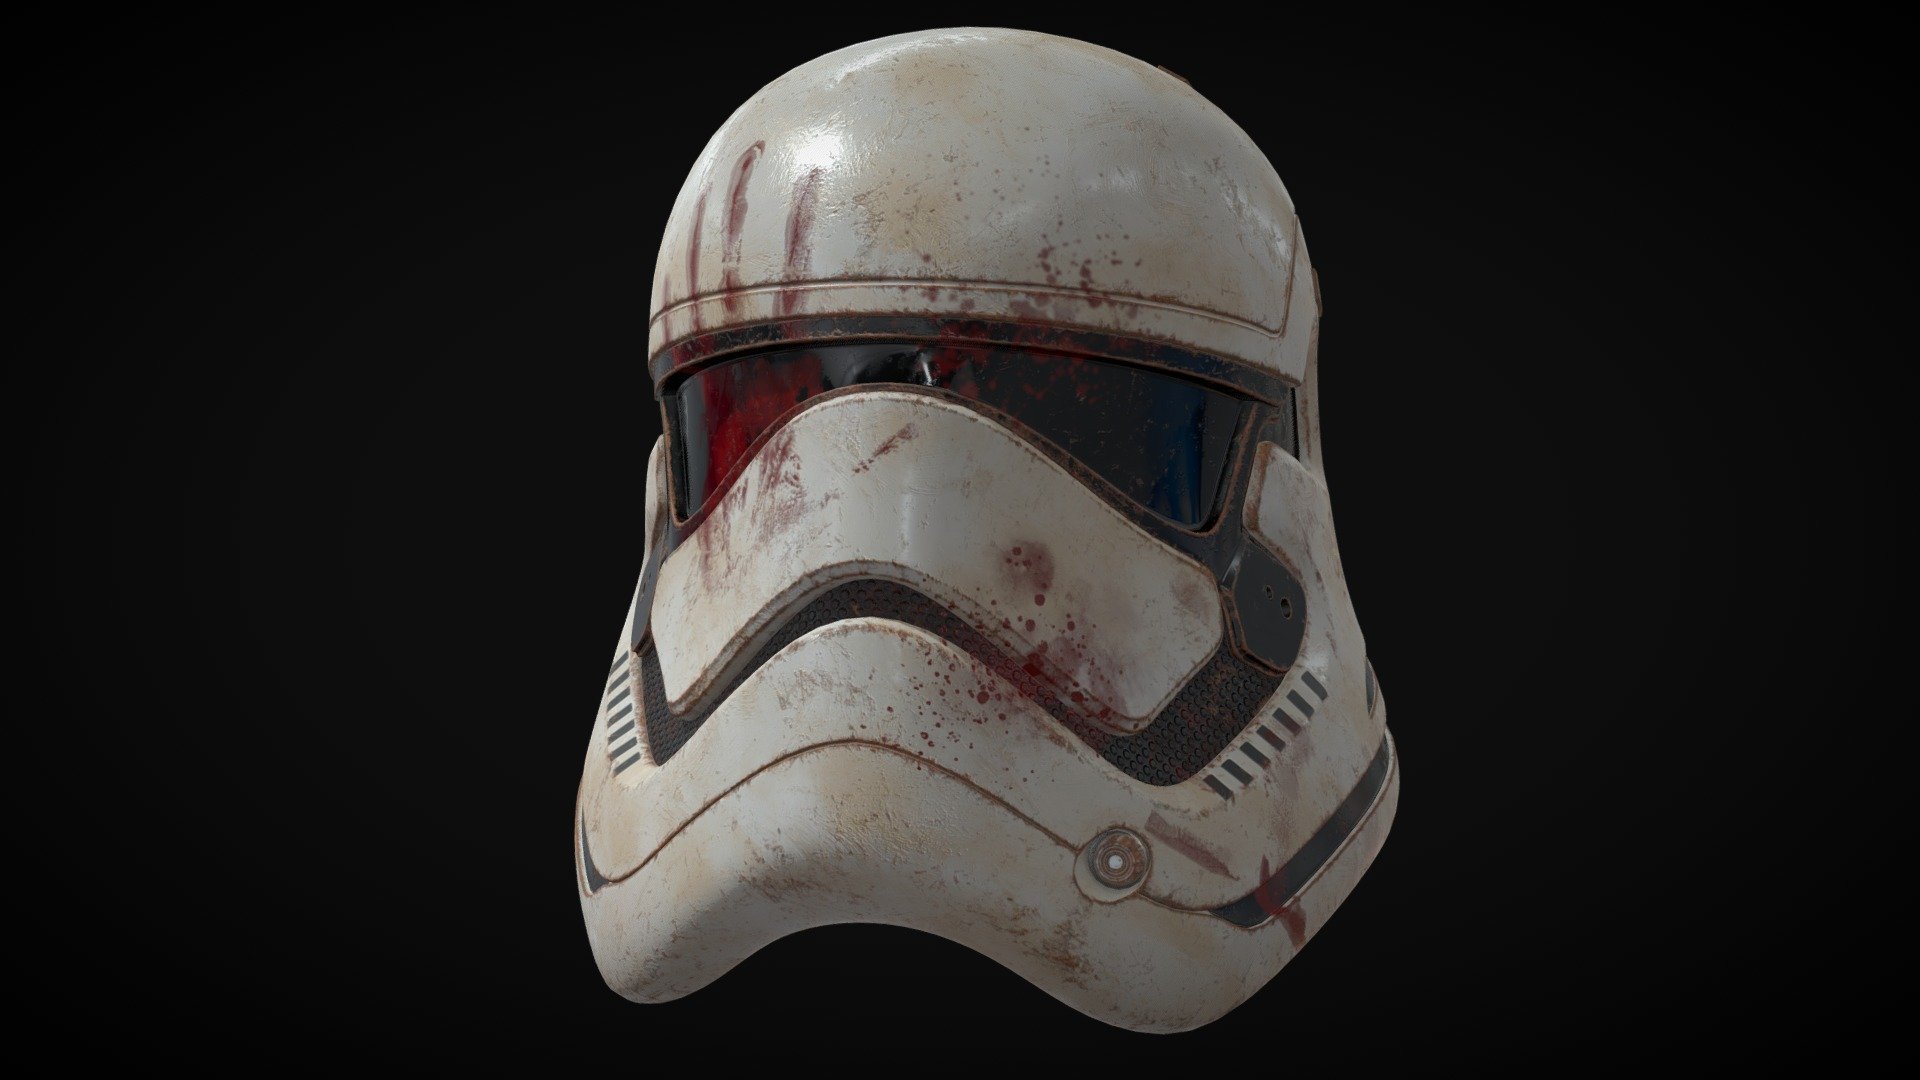 Name: Star Wars Stormtrooper Helmet

PBR

Dimension:  30 x 35 x 33

Polys:  27 055

Verts:  27 778 

Number of textures: , PBR-metal-rough_3

Texture dimensions: 4096 x4096

Units: Centimeters
 - Star Wars Stormtrooper Helmet - Buy Royalty Free 3D model by Paramatma 3d model